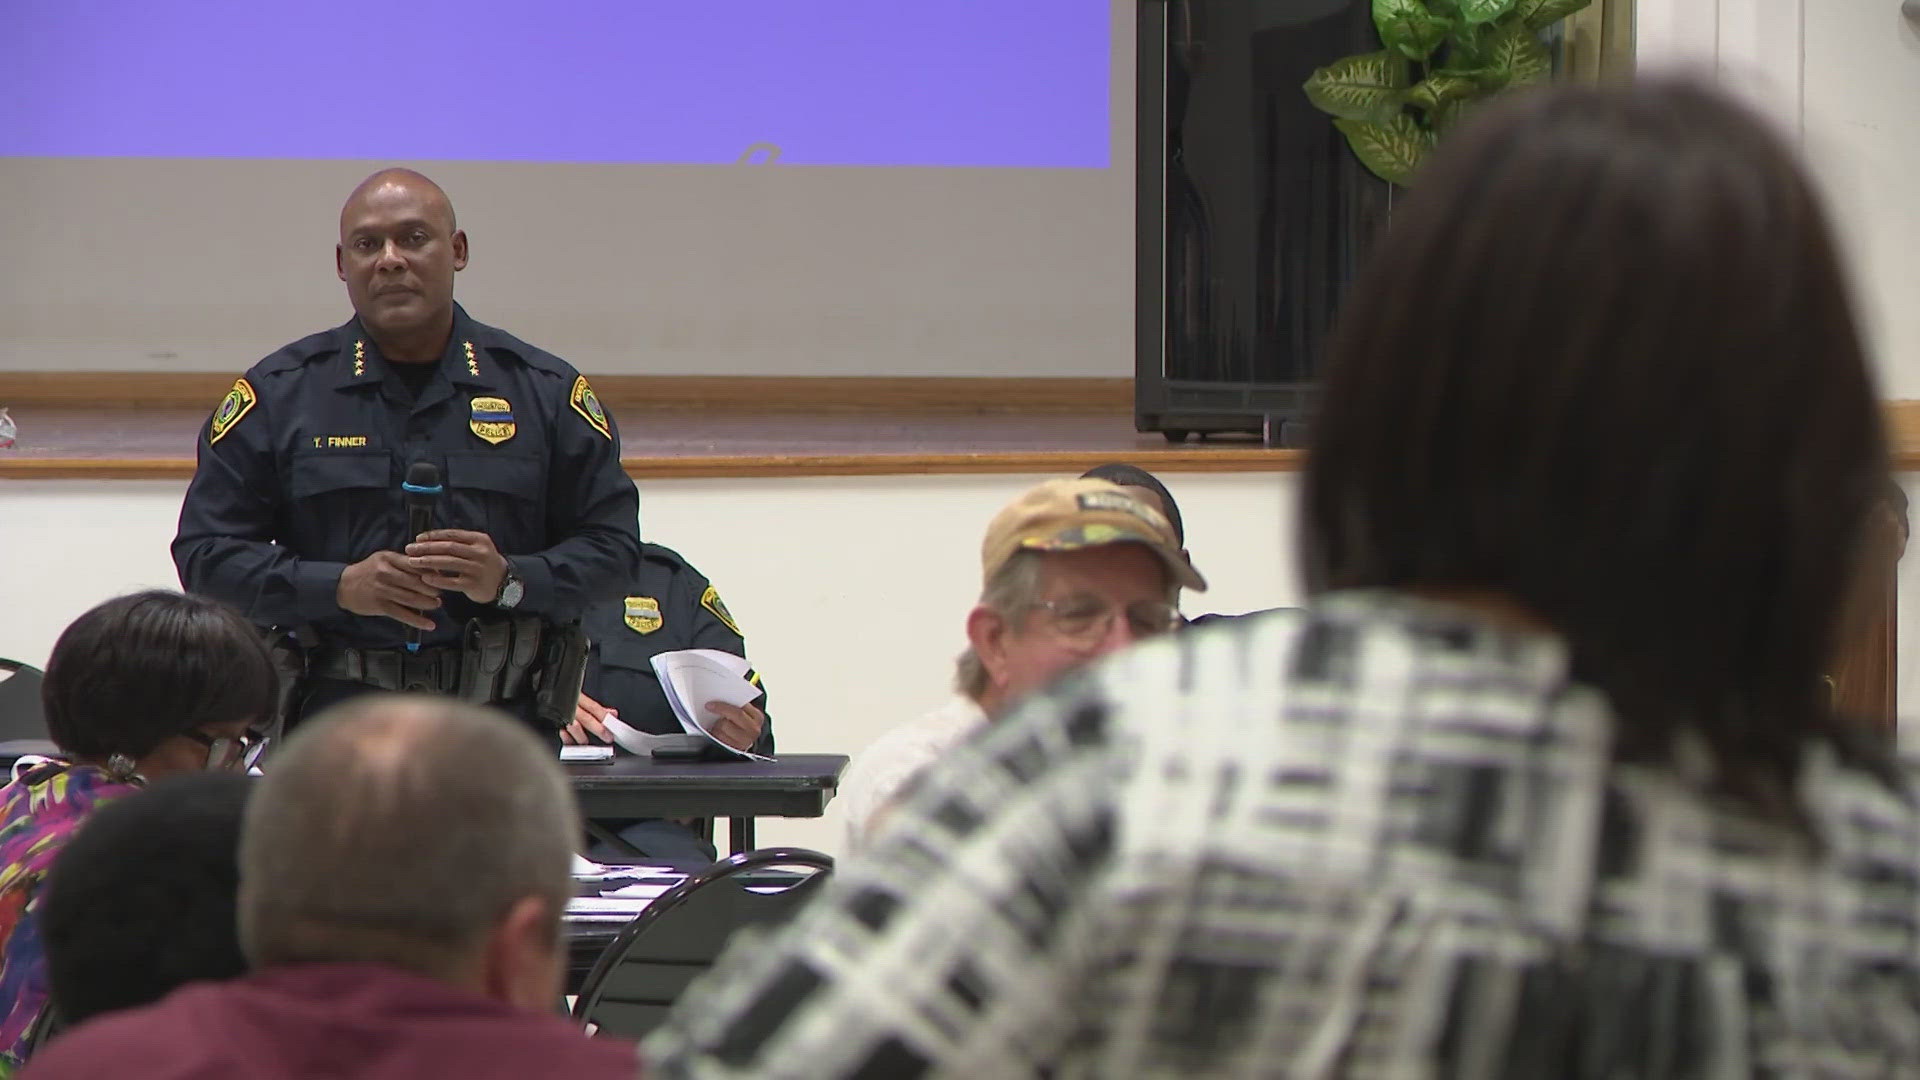 On Thursday night, every seat was taken during a town hall meeting Houston police officers held with frustrated residents.